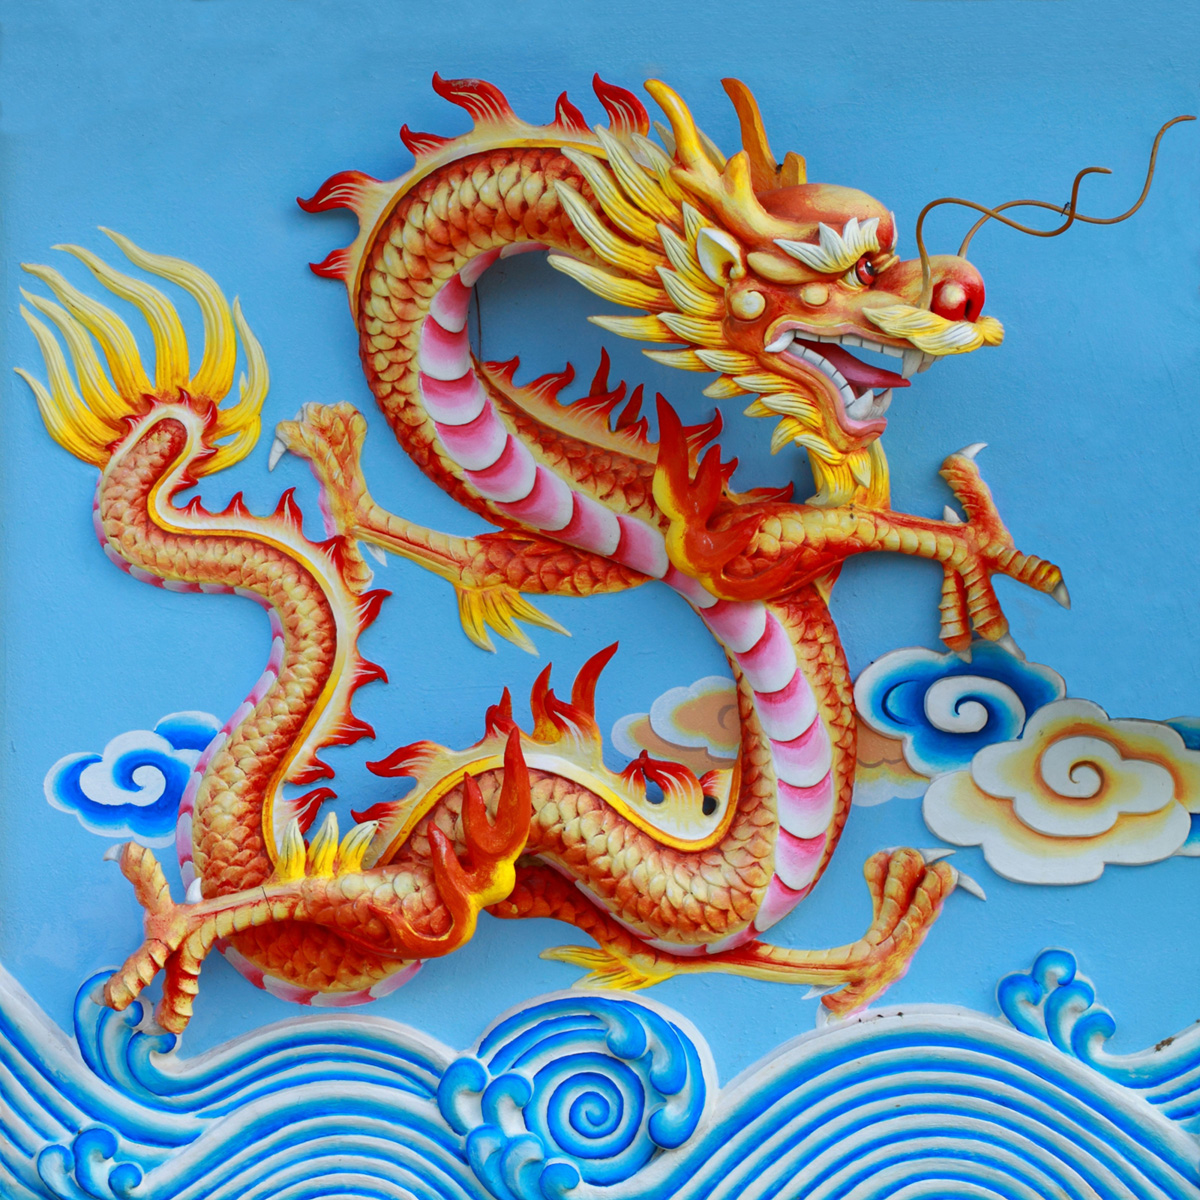 Chinese dragon sculpture 29172 - Books and articles - Classical ...